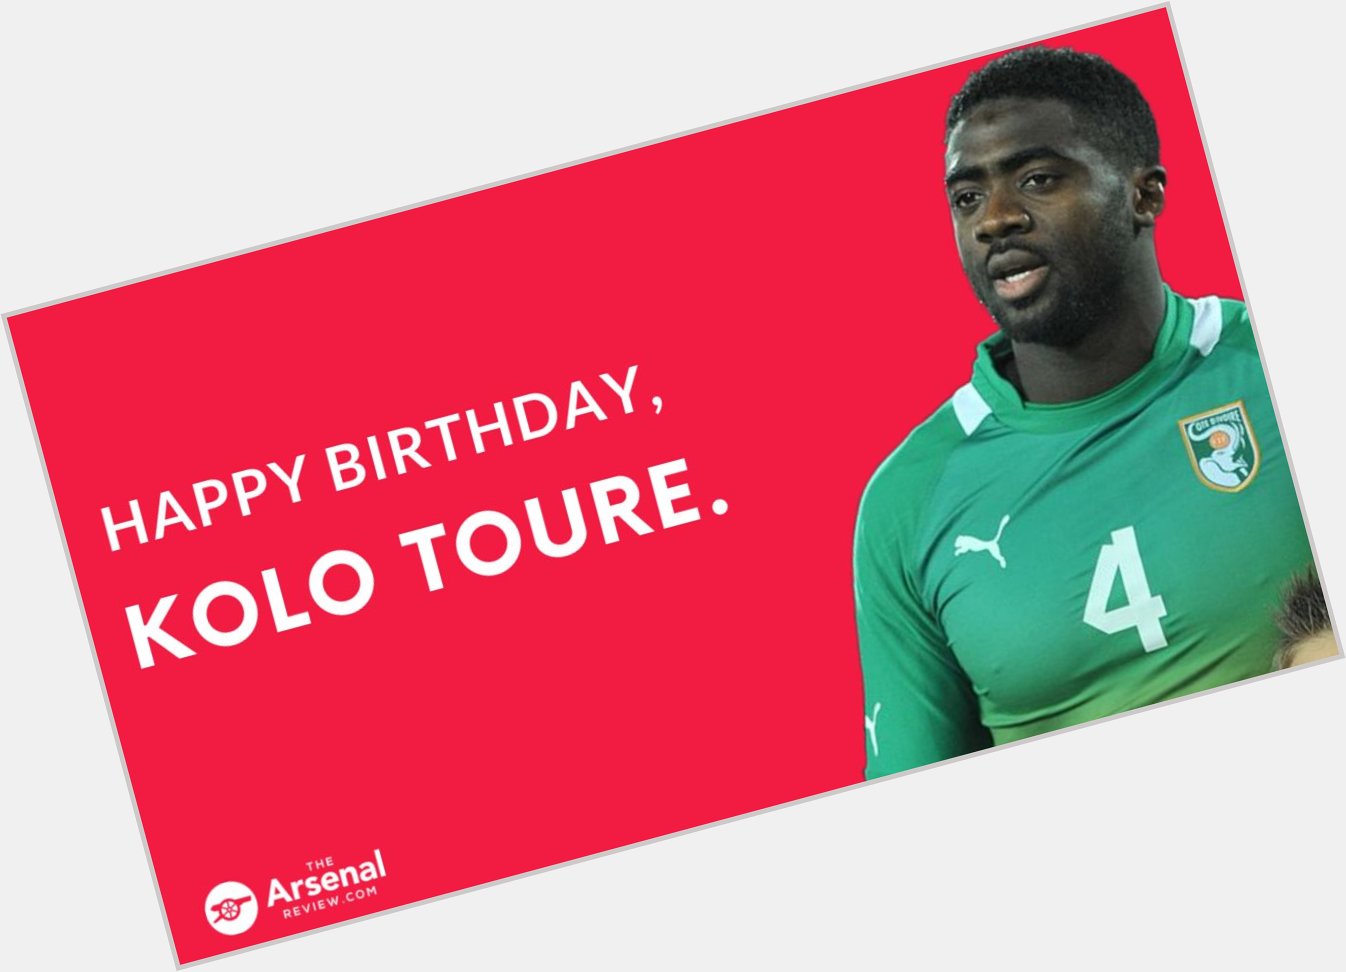 Kolo Toure spent 7 years at Arsenal and was a member of the memorable Invincible team Happy Birthday, Kolo 